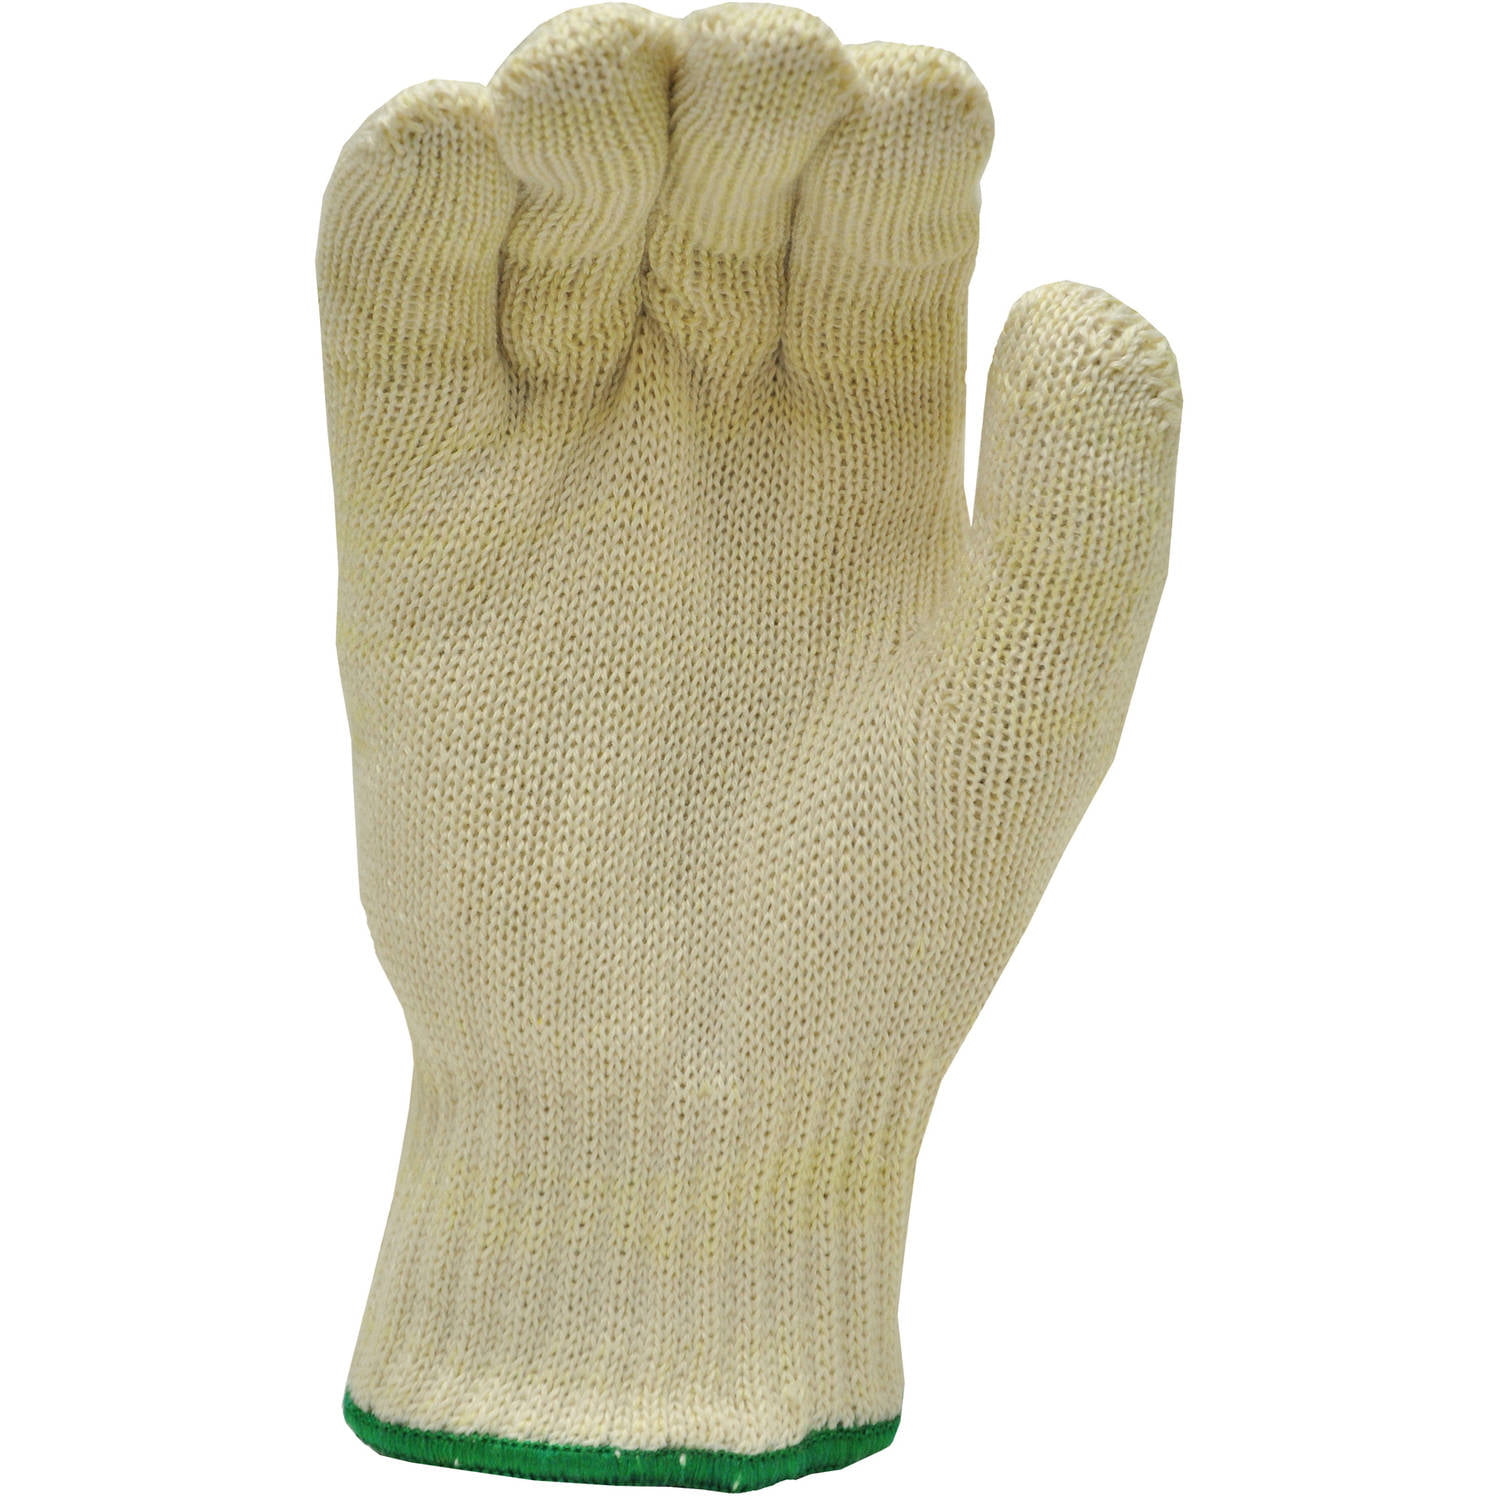 Commercial Chef Heat Resistant Thick Aramid Fiber Oven Mitts with